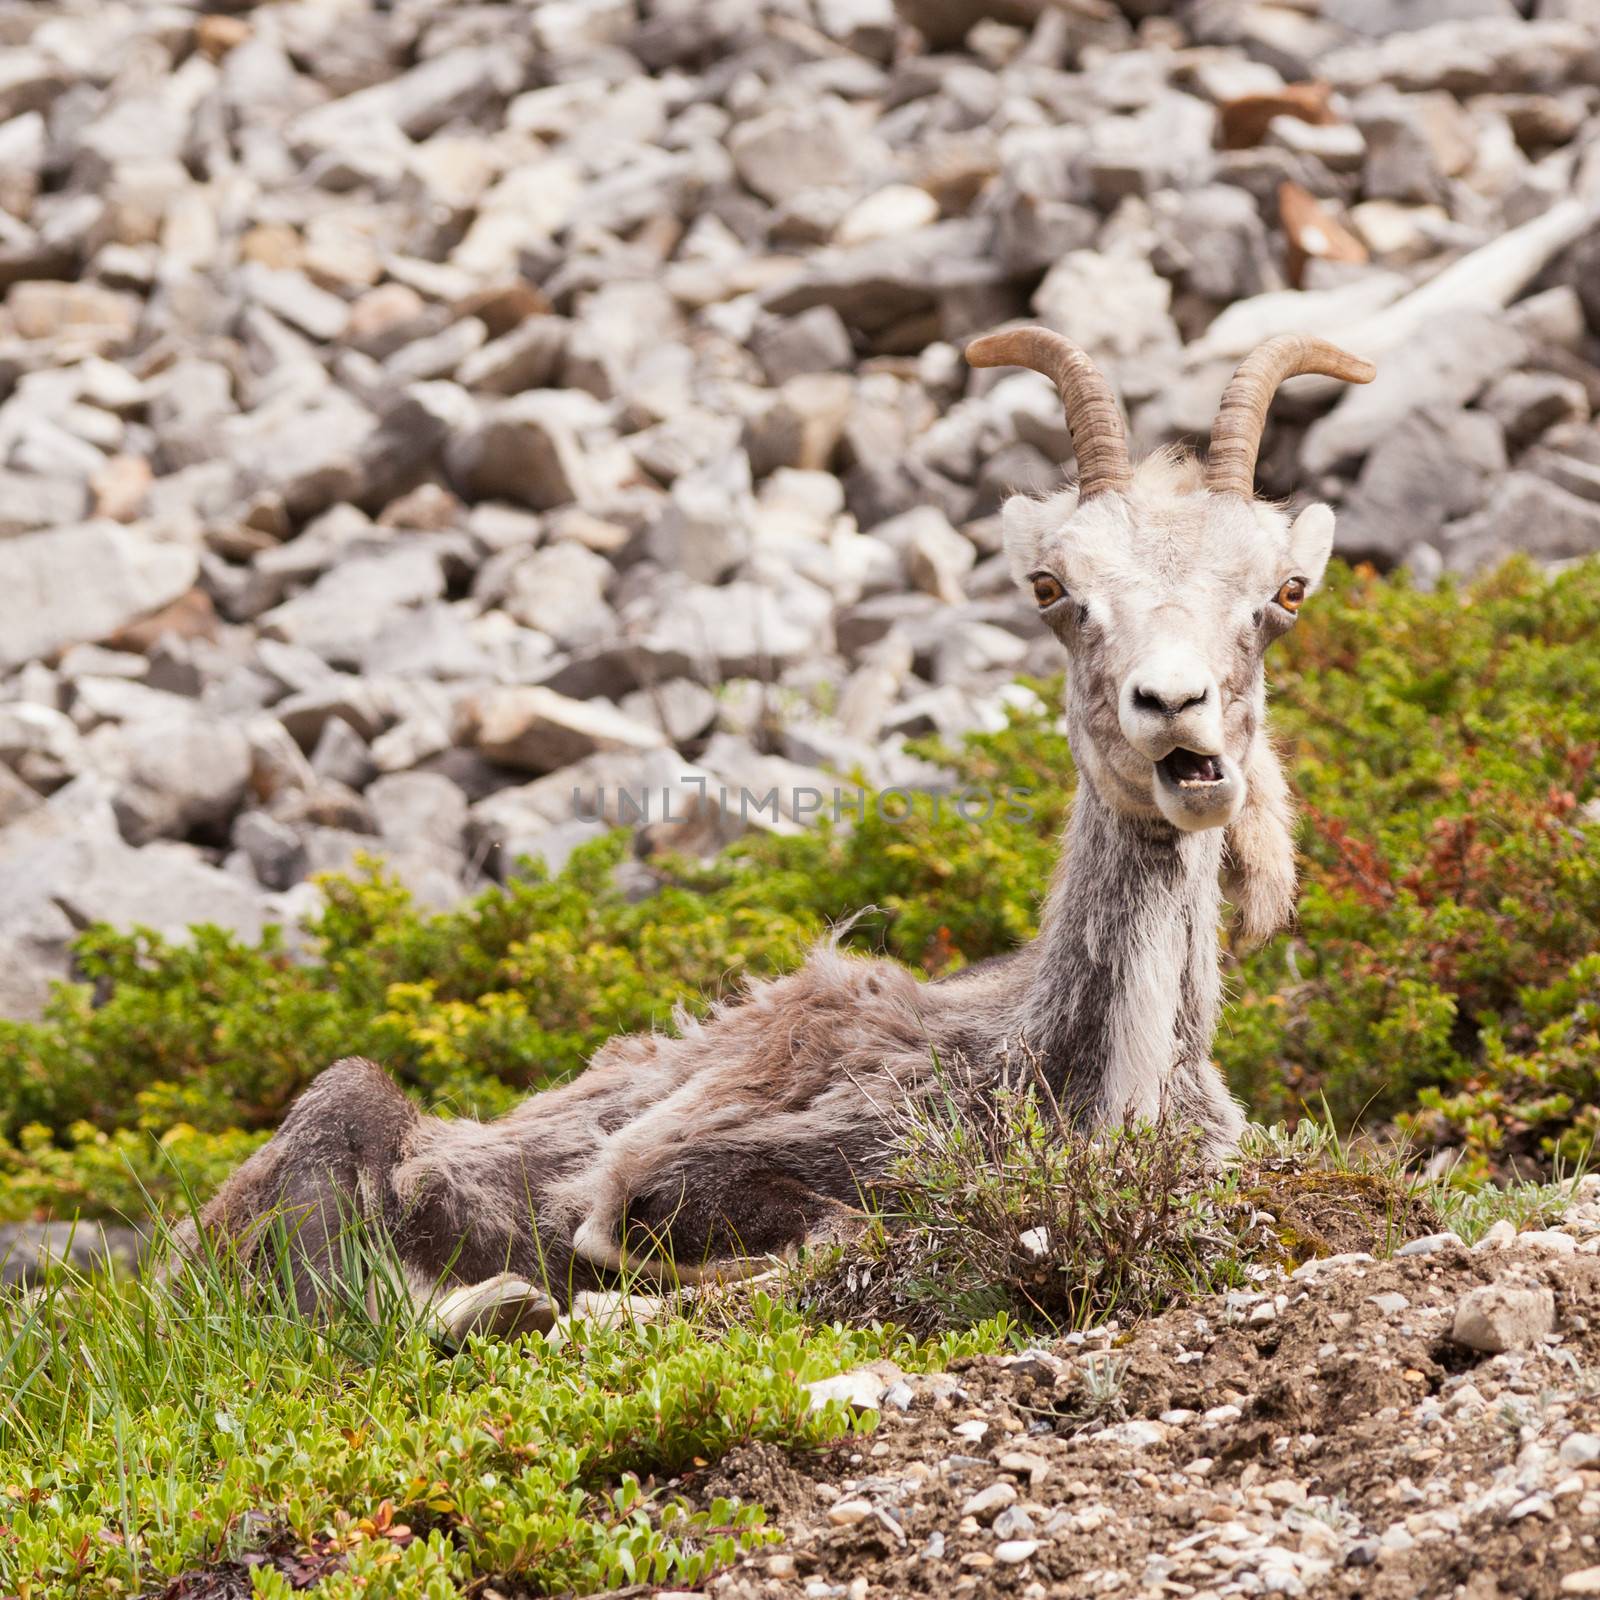 Female Stone Sheep, Ovis dalli stonei, or thinhorn sheep resting and curiously watching with funny expression, wildlife of northern Canadian Rocky Mountains, British Columbia, Canada